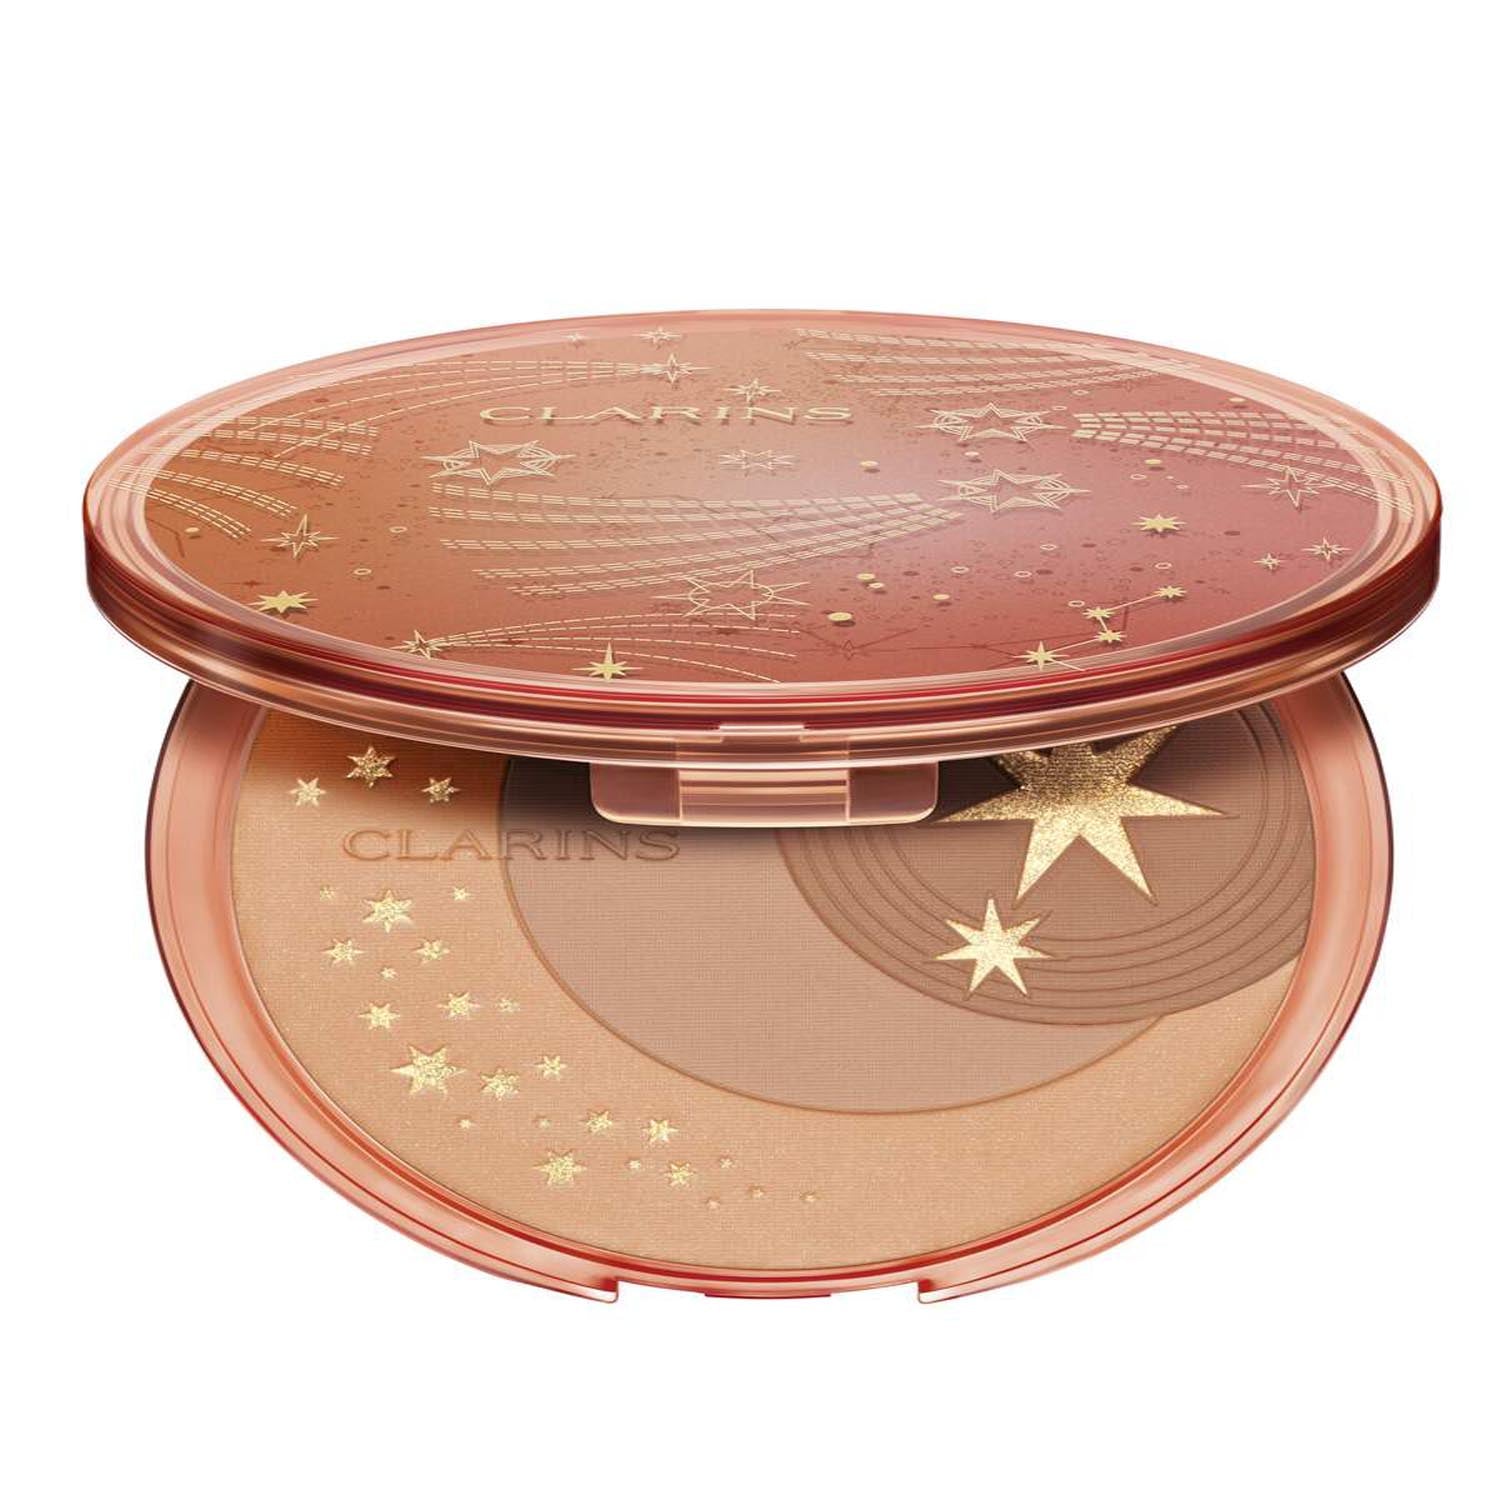 Clarins Summer In Rose Bronzing Compact 1 Shaws Department Stores